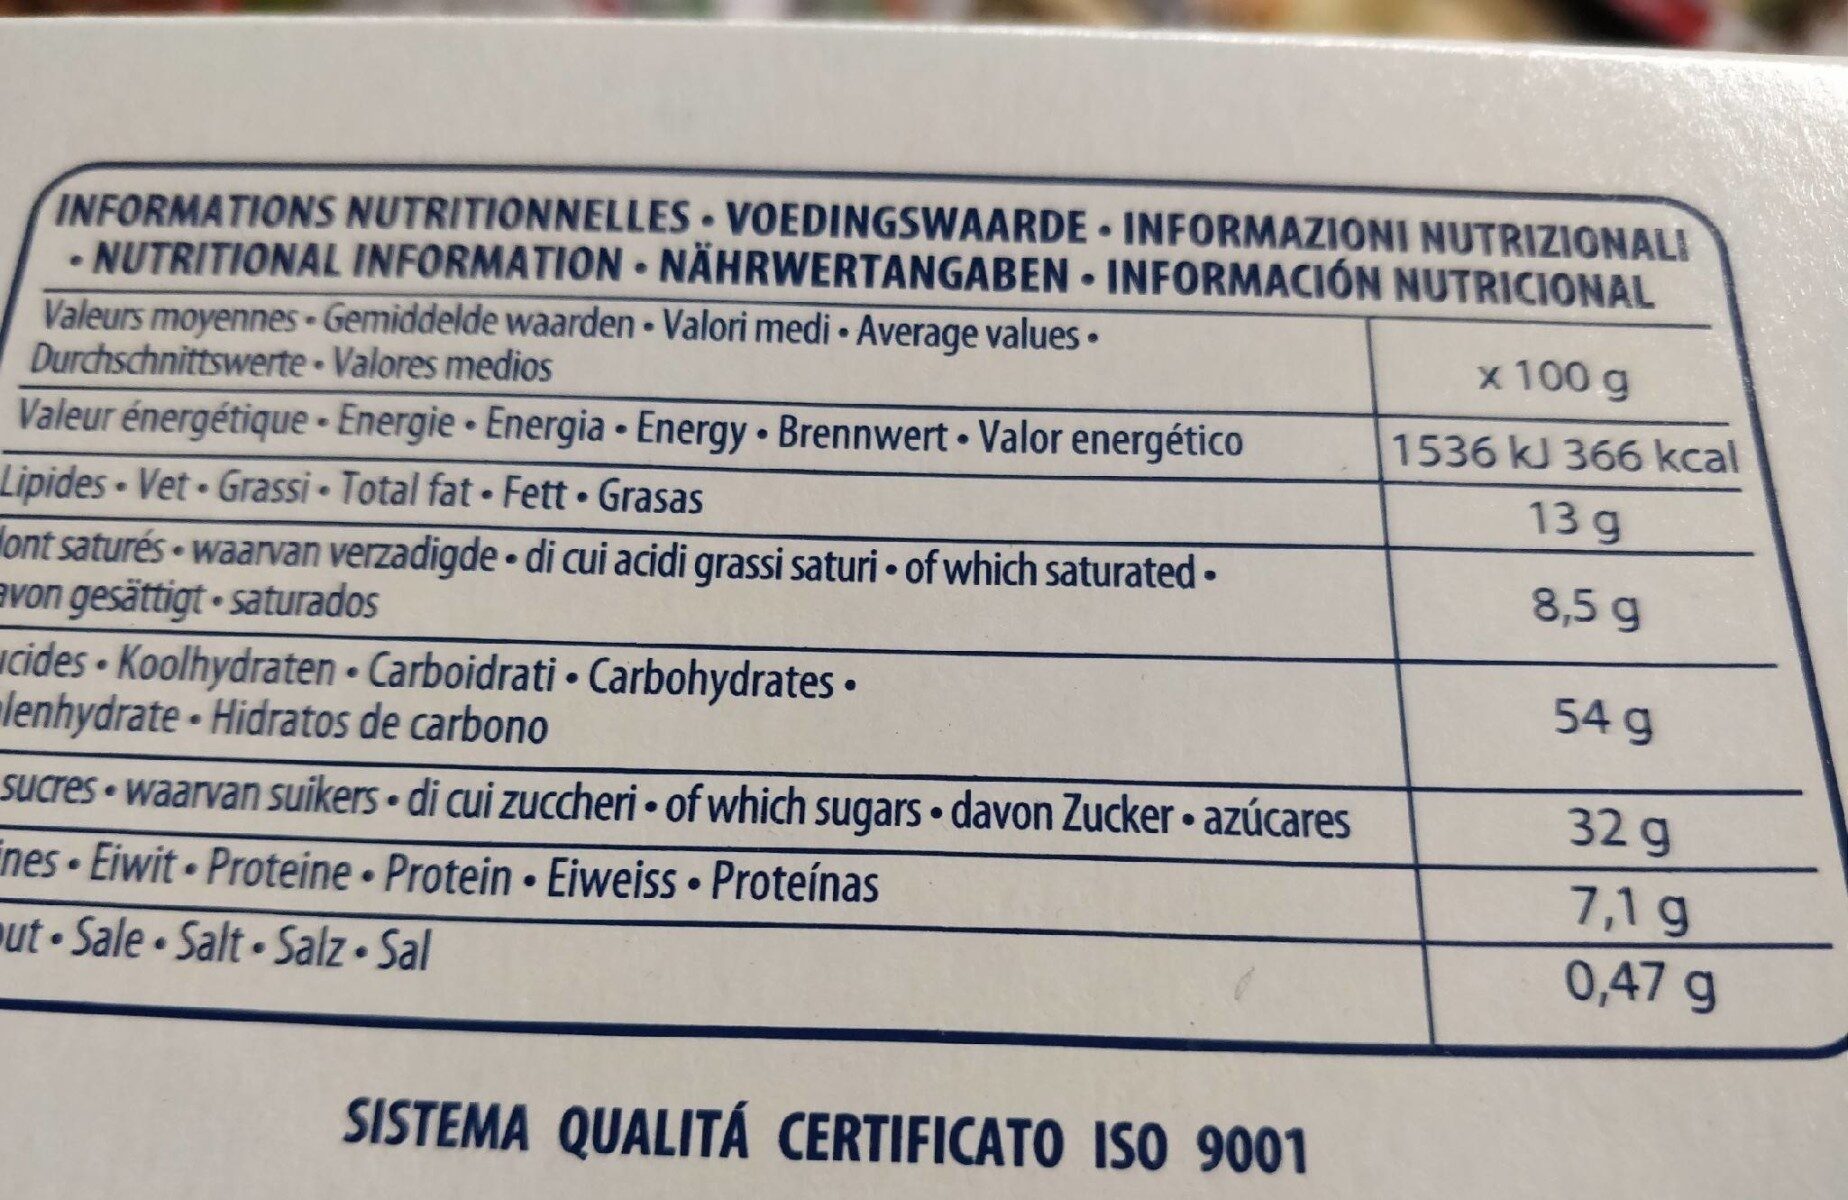 Panettone 750g - Nutrition facts - fr